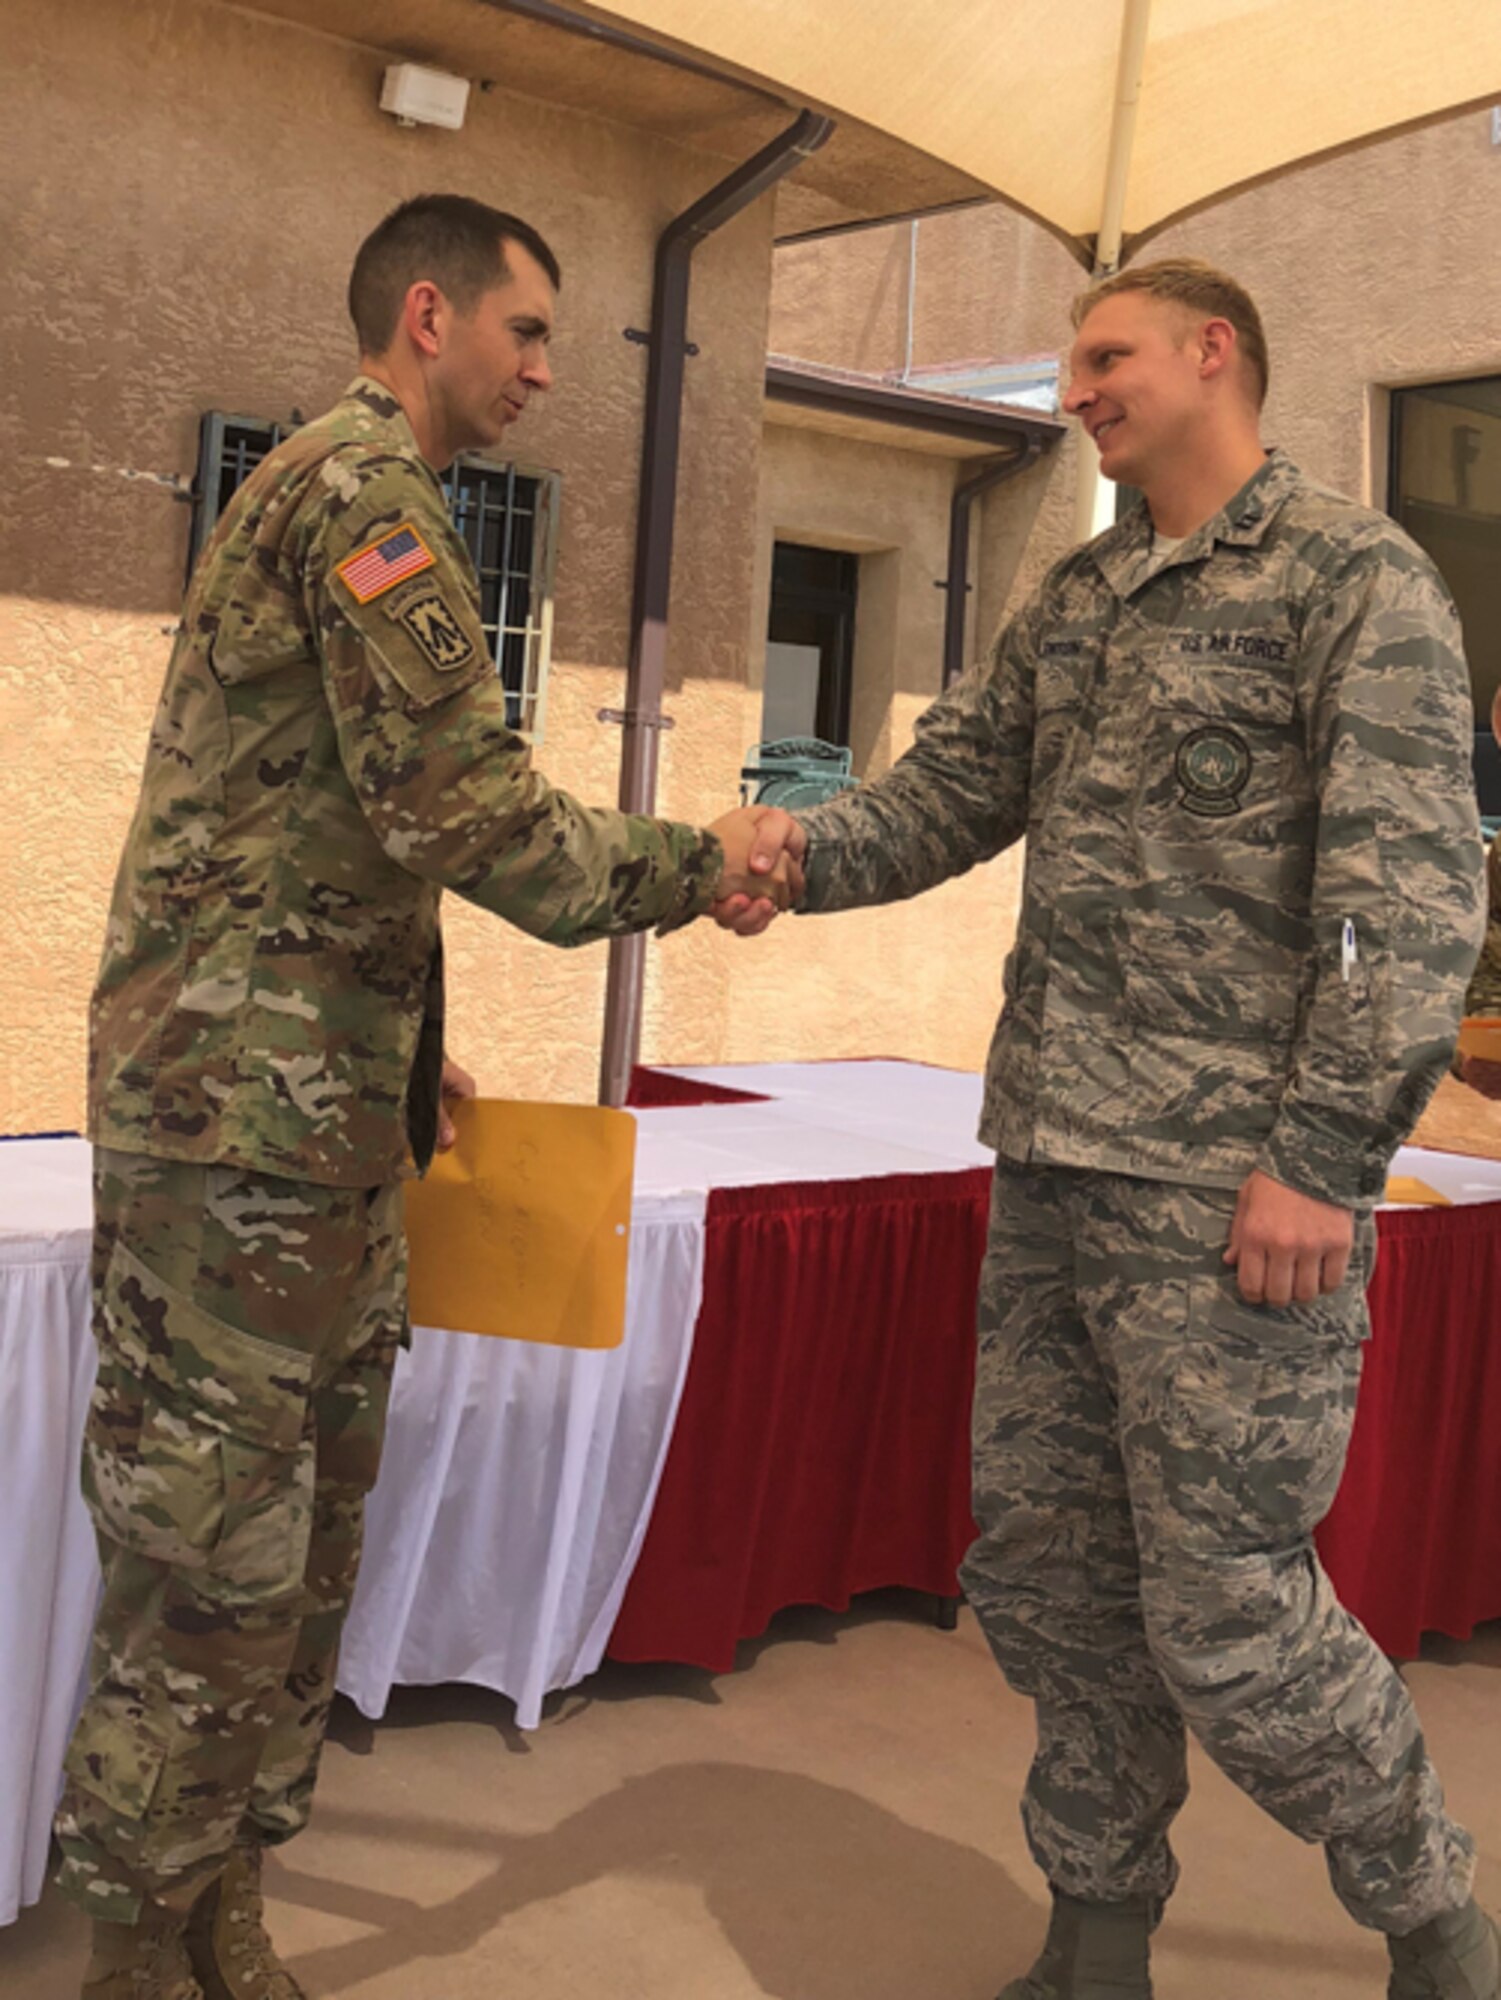 Capt. Jason Allenton, right, assigned to the 225th Air Defense Squadron, graduates from Air Defense Artillery Fire Control Officers (ADAFCO), Kirkland Air Force Base, New Mexico, July 27, 2018.   Experience gained at the ADAFCO course assists the Western Air Defense Sector in mission planning, execution and coordination of Army assets as part of Operation Noble Eagle. (Courtesy photo by Capt. Jason Allenton)